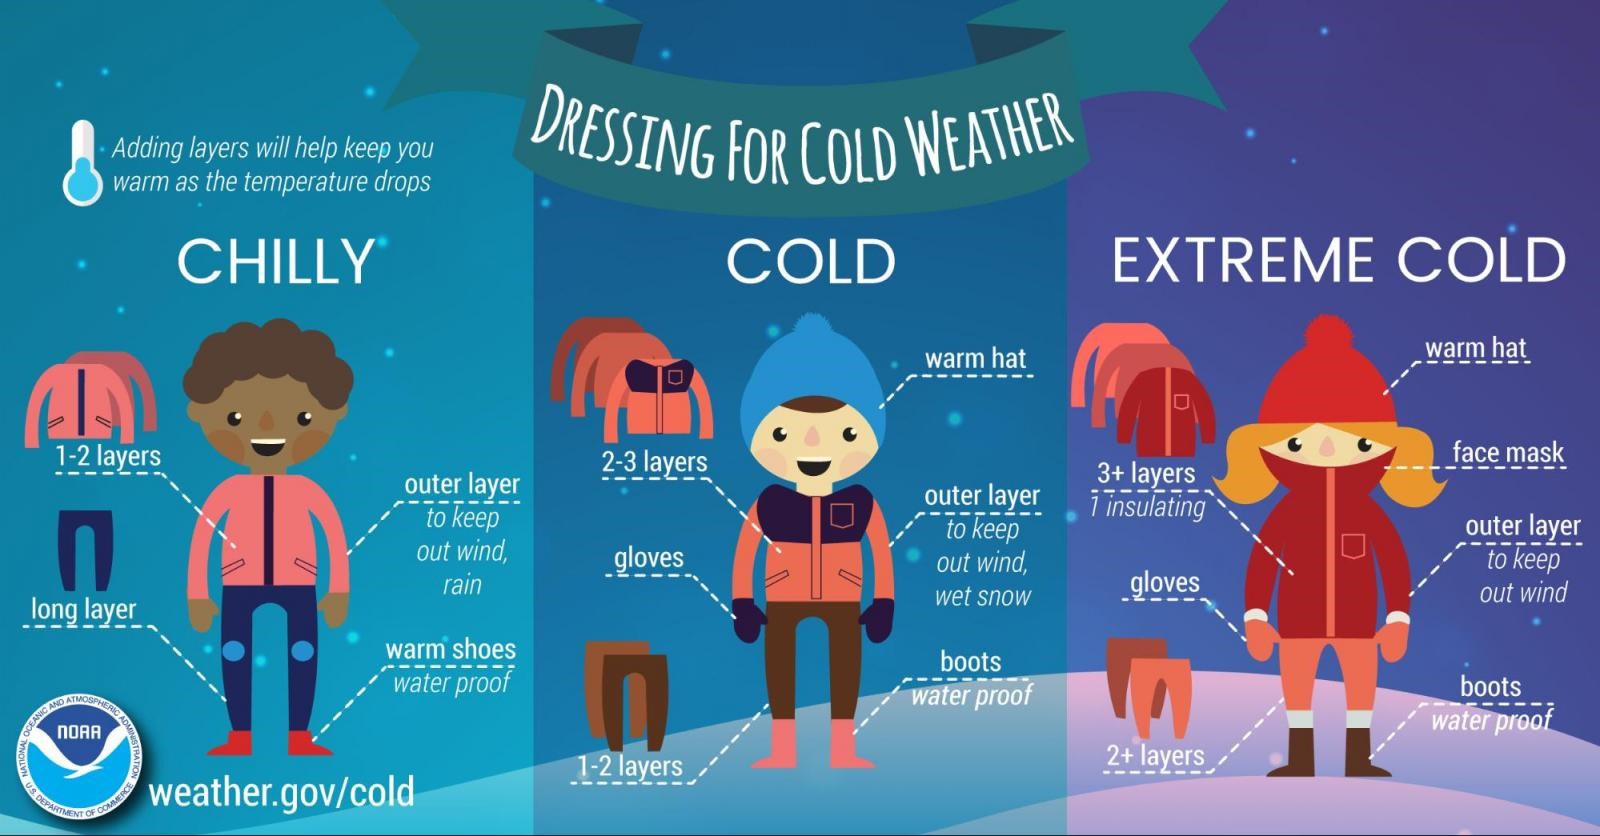 MEDSTAR RECOMMENDATIONS AND OPERATIONS FOR COLD WEATHER